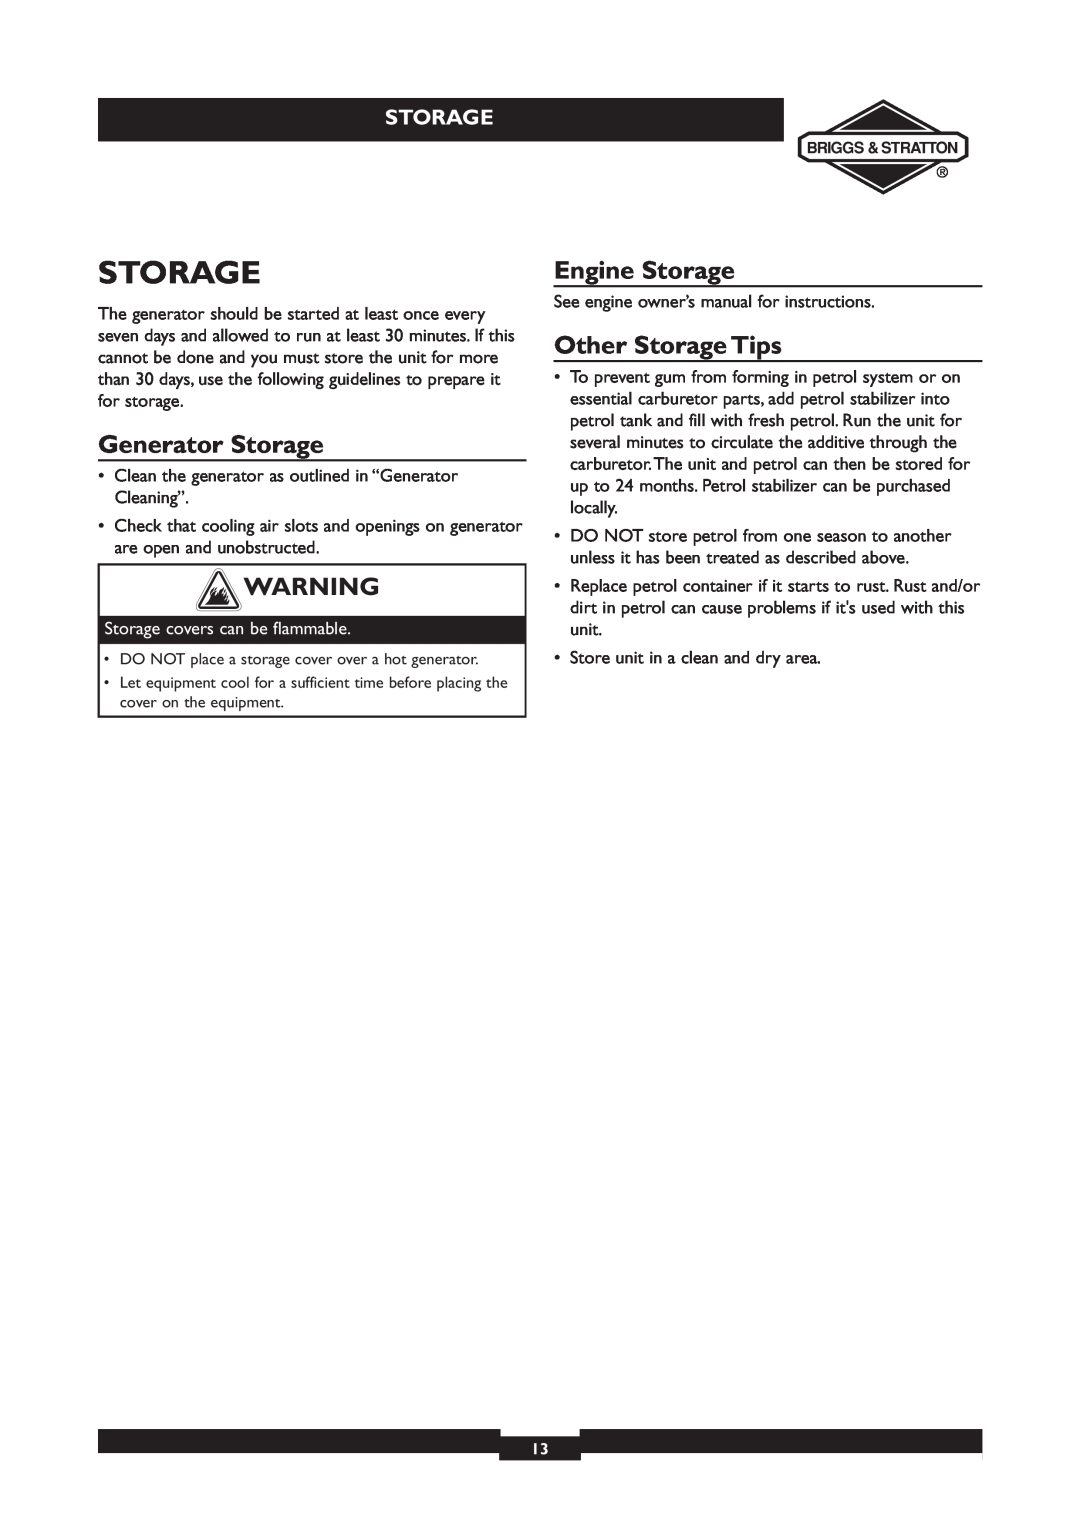 Briggs & Stratton 030212 Generator Storage, Engine Storage, Other Storage Tips, Storage covers can be flammable 